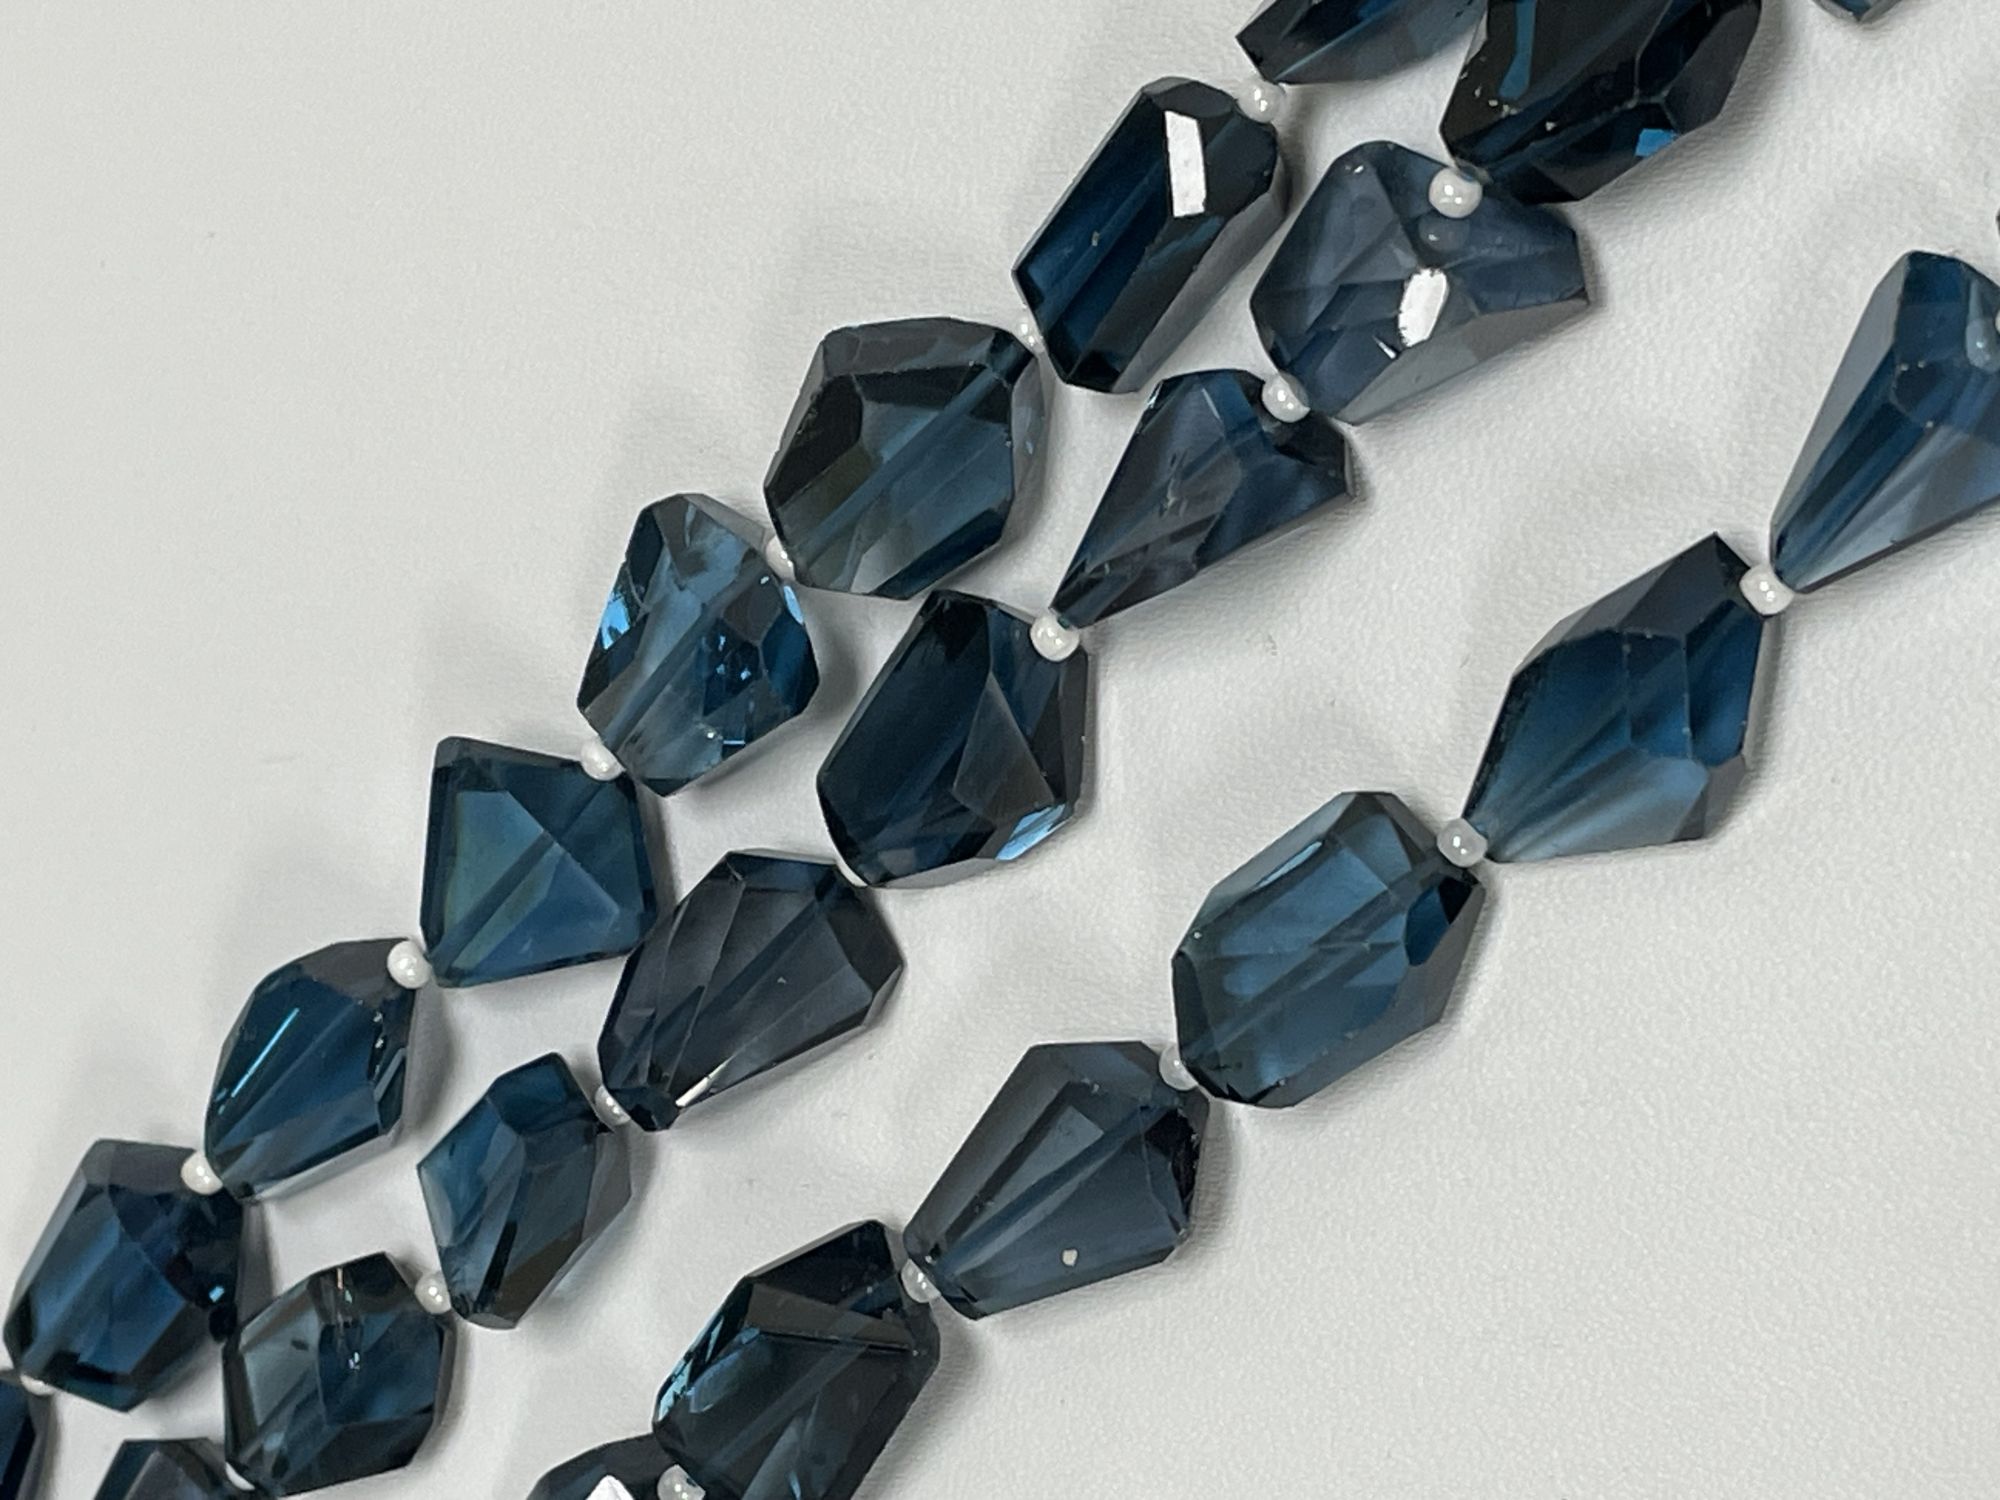 London Blue Topaz Nugget Faceted